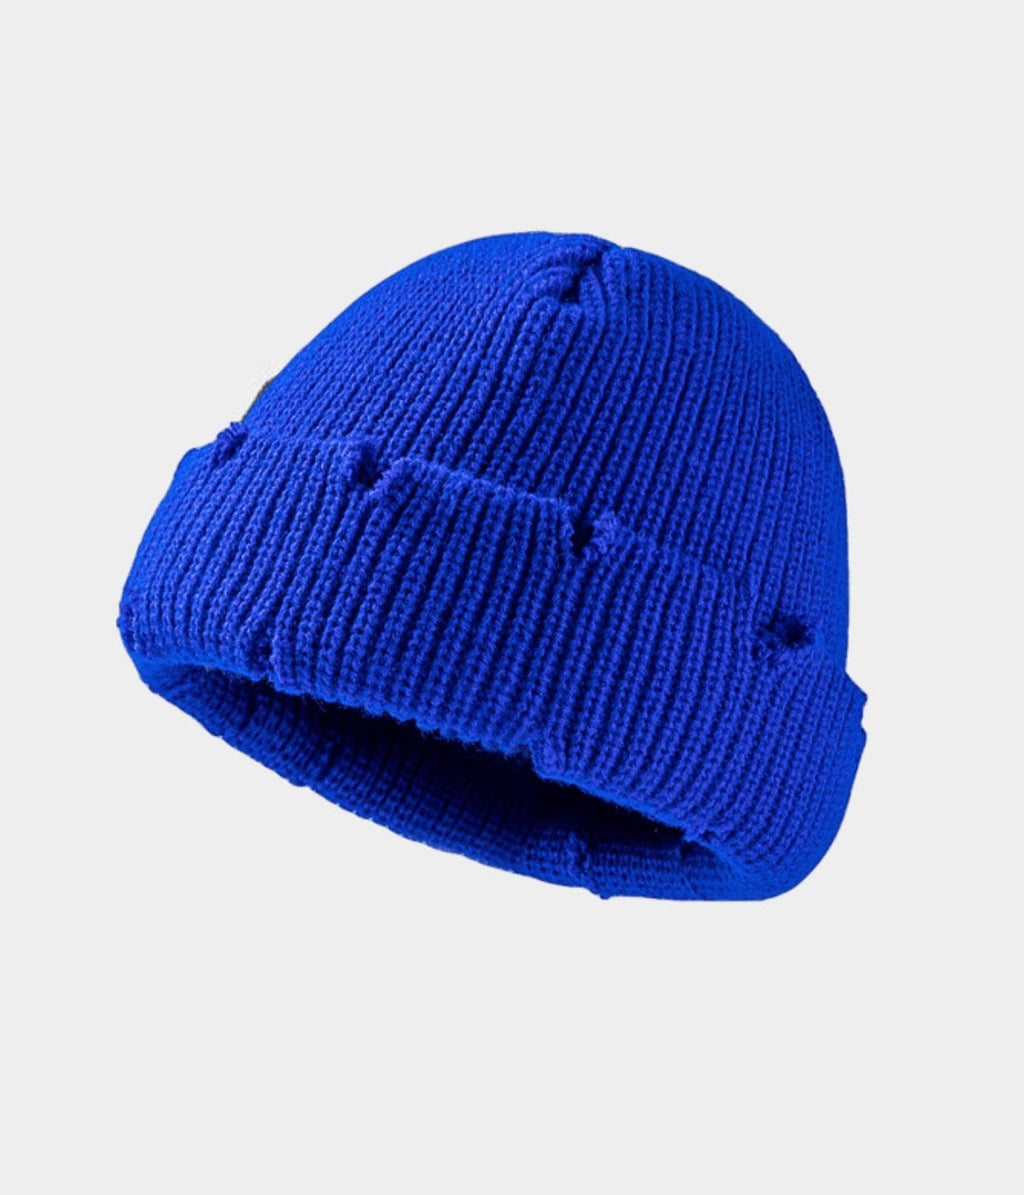 RIPPED FISHERMAN BEANIE. | High quality by CAPS.